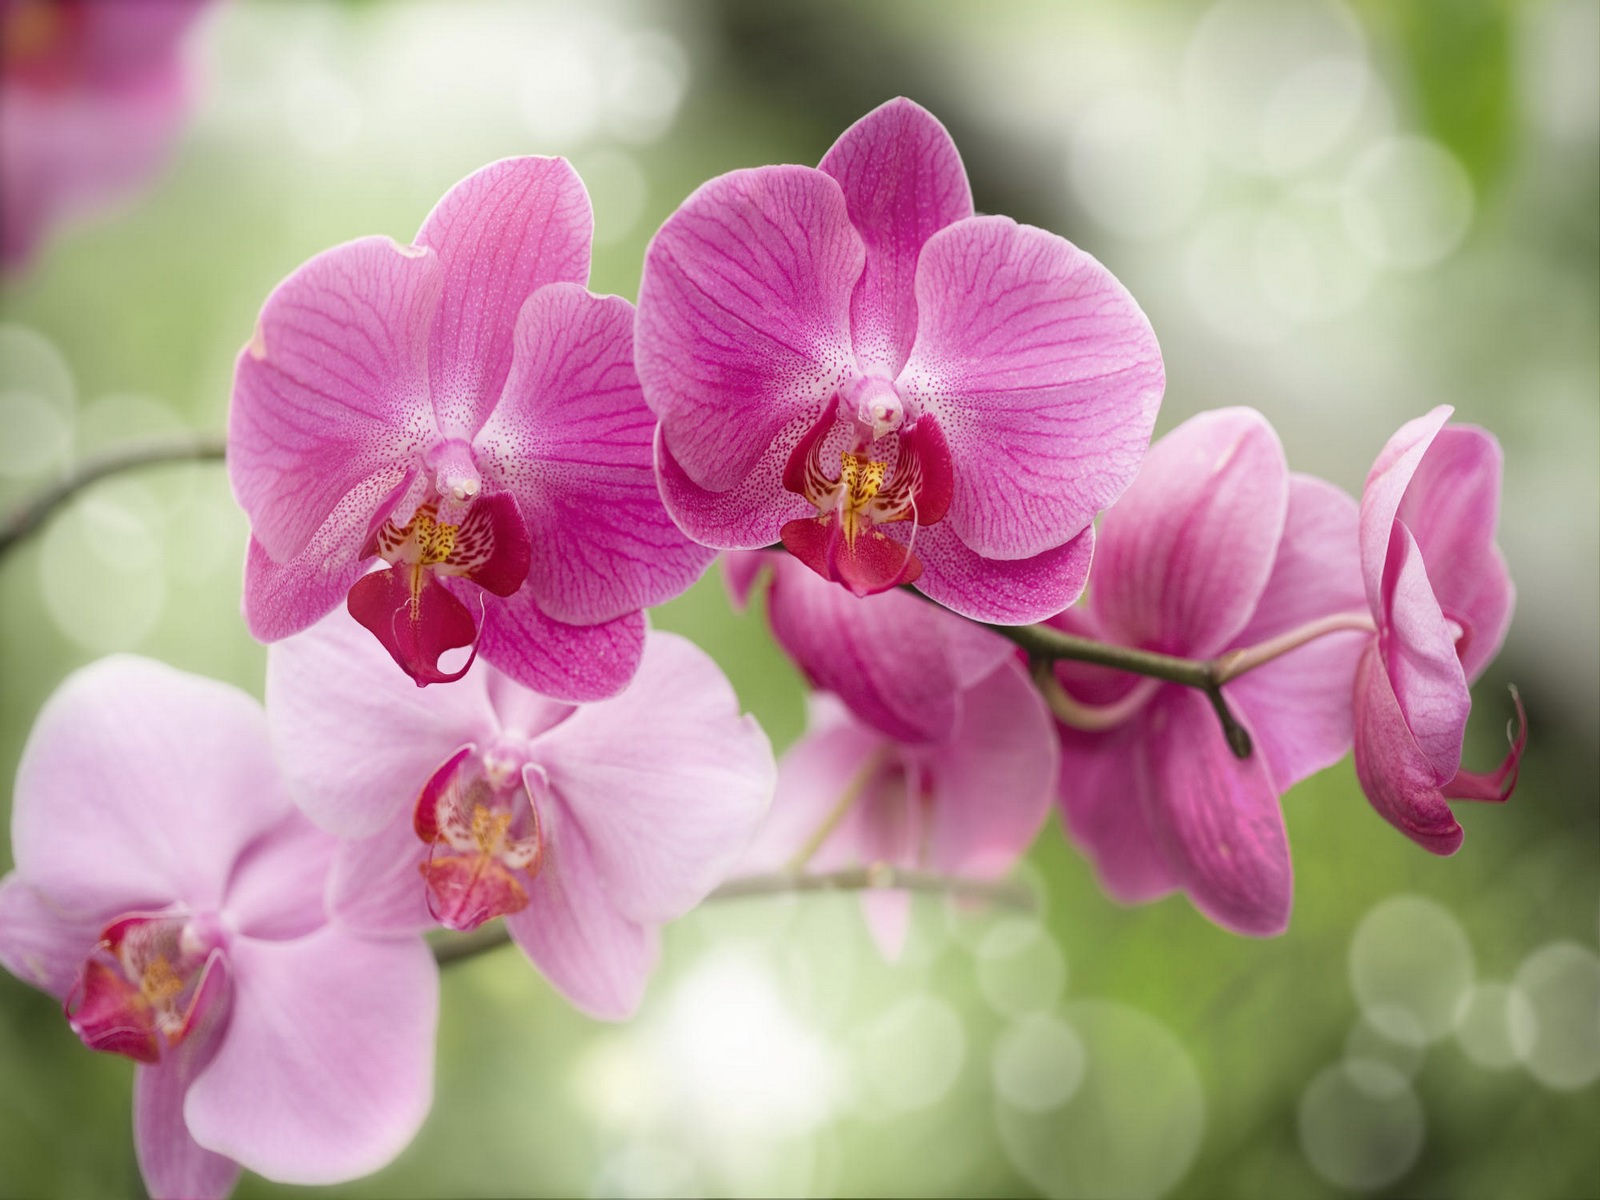 Orchids are among the most popular houseplants of all time, and it is easy to see why: they are beautiful and lend your home an elegant, tropical flair.